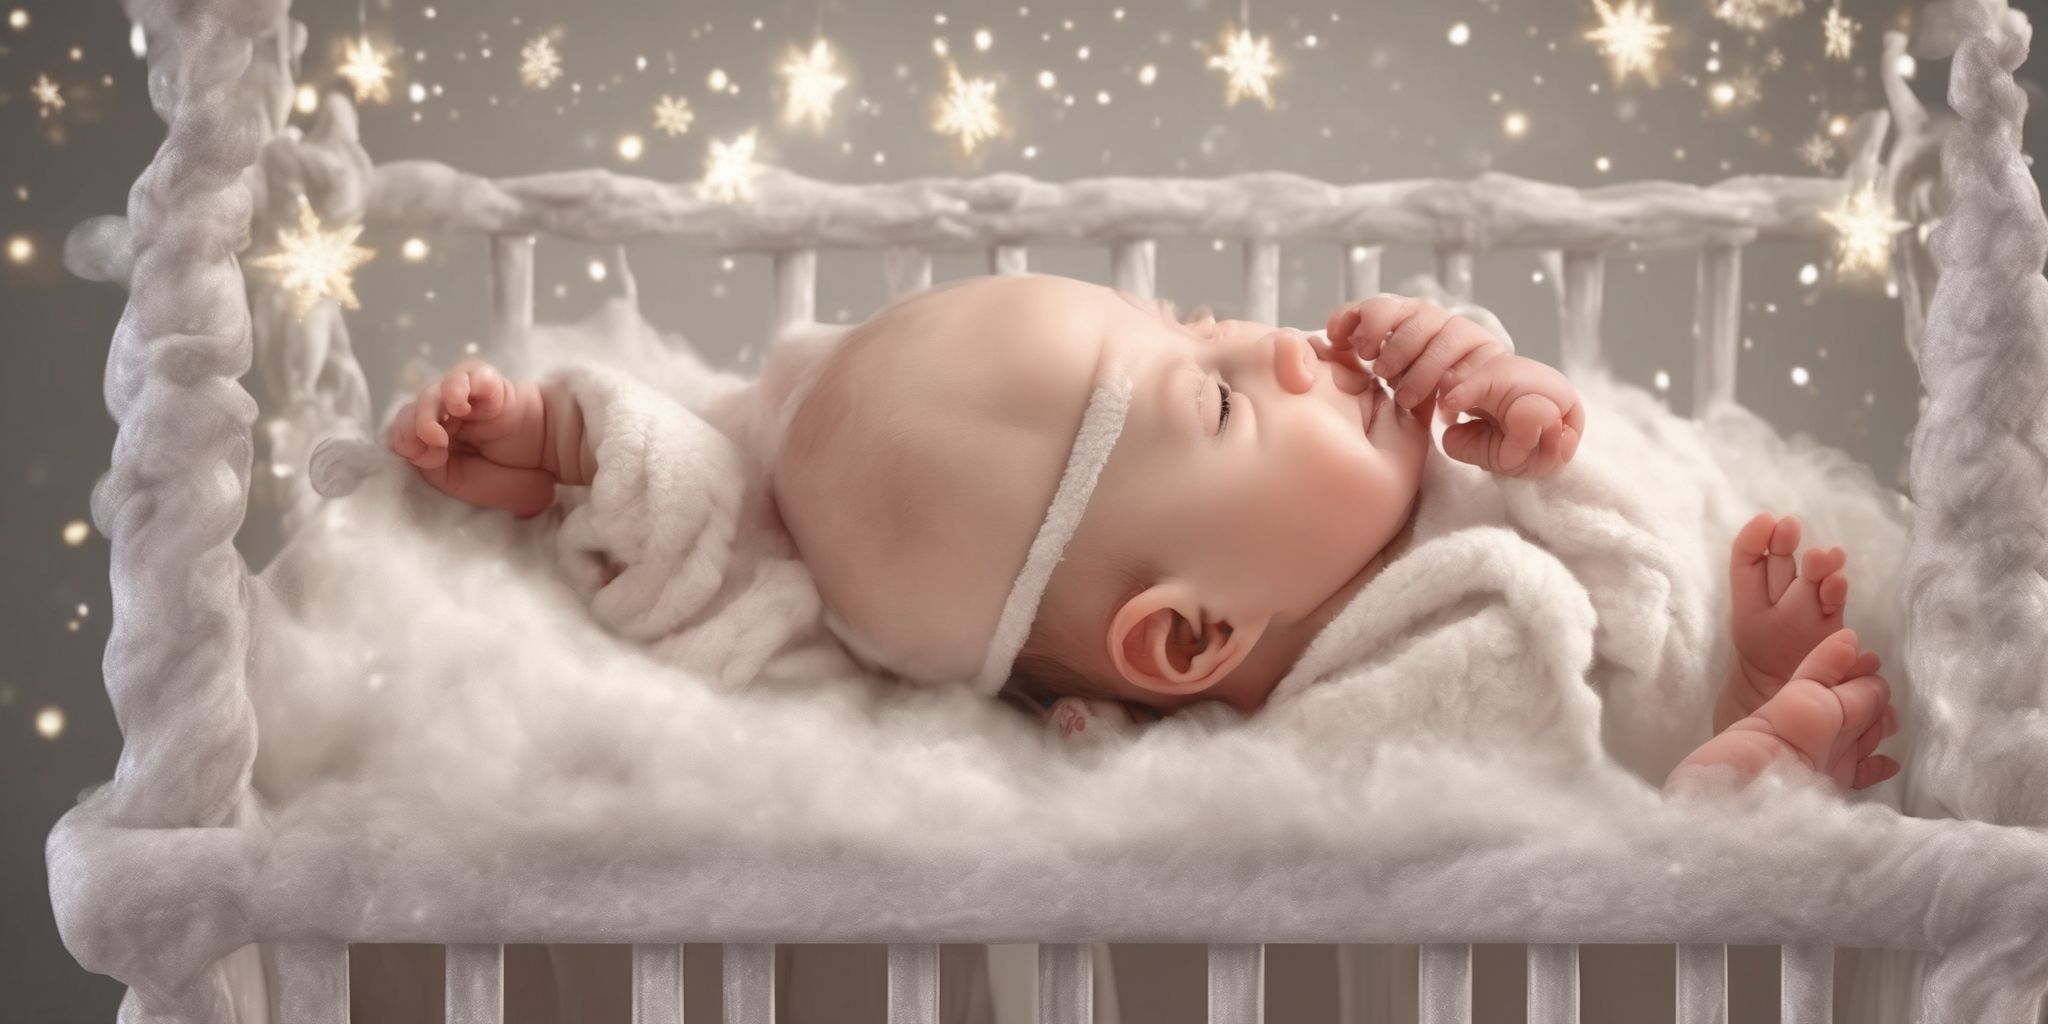 Baby in a crib in realistic Christmas style